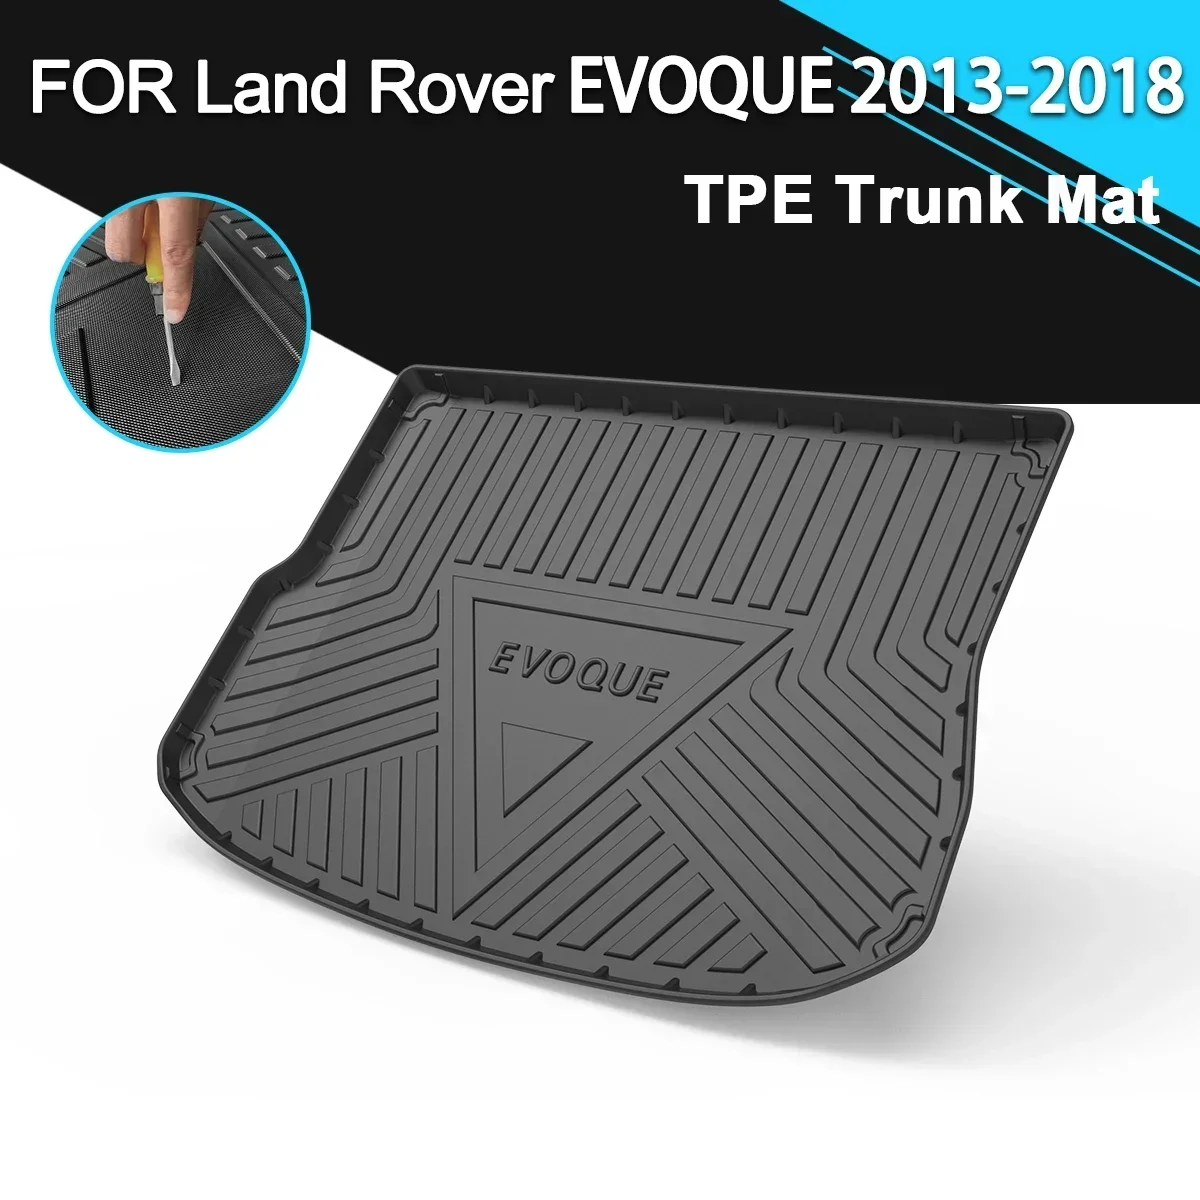 

Car Rear Trunk Cover Mat Non-Slip Waterproof Rubber TPE Cargo Liner Accessories For Land Rover EVOQUE 2013-2018